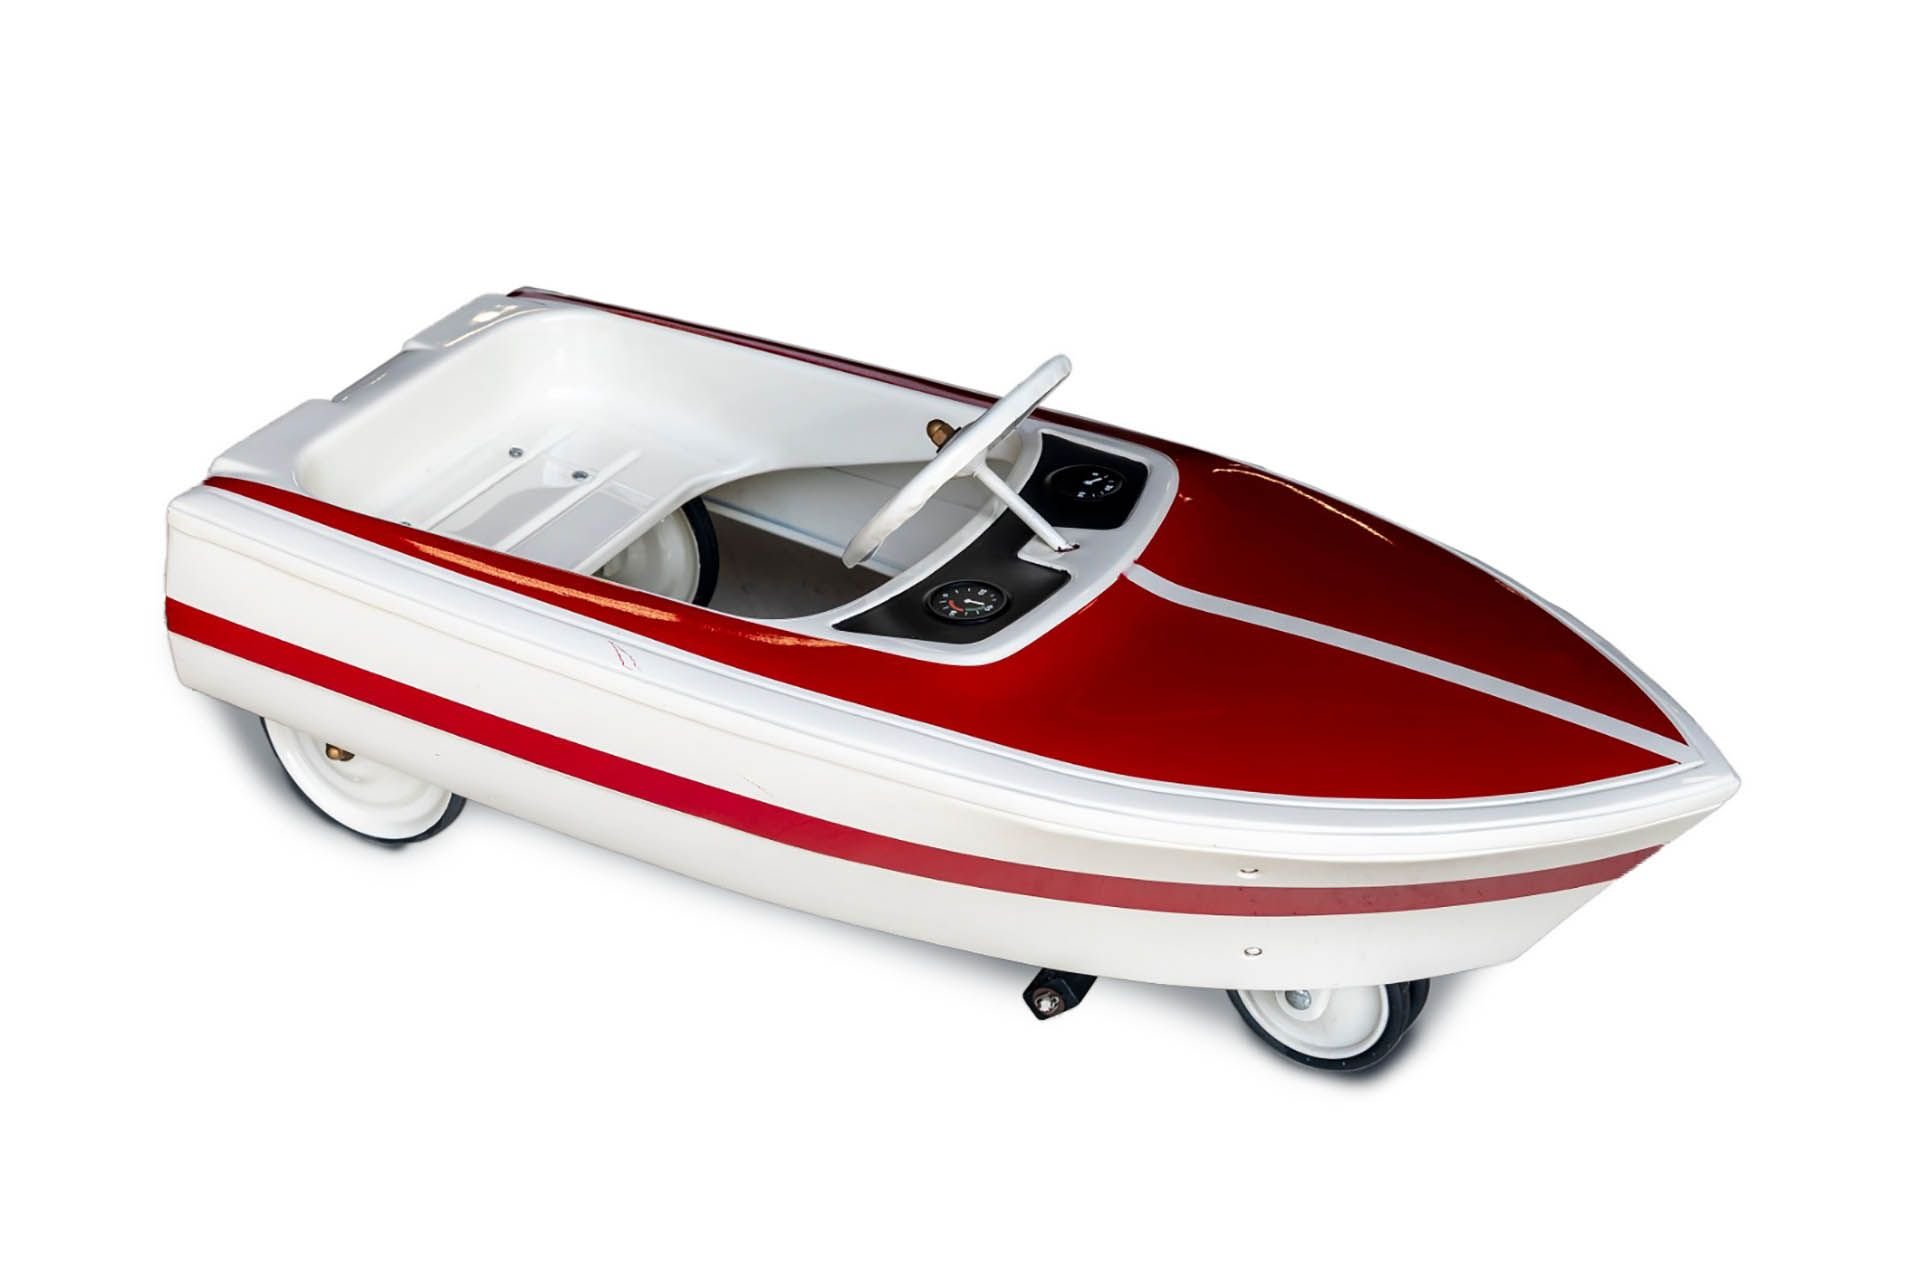 For Sale Children's Speedboat Pedal Car in Excellent Restored Condition